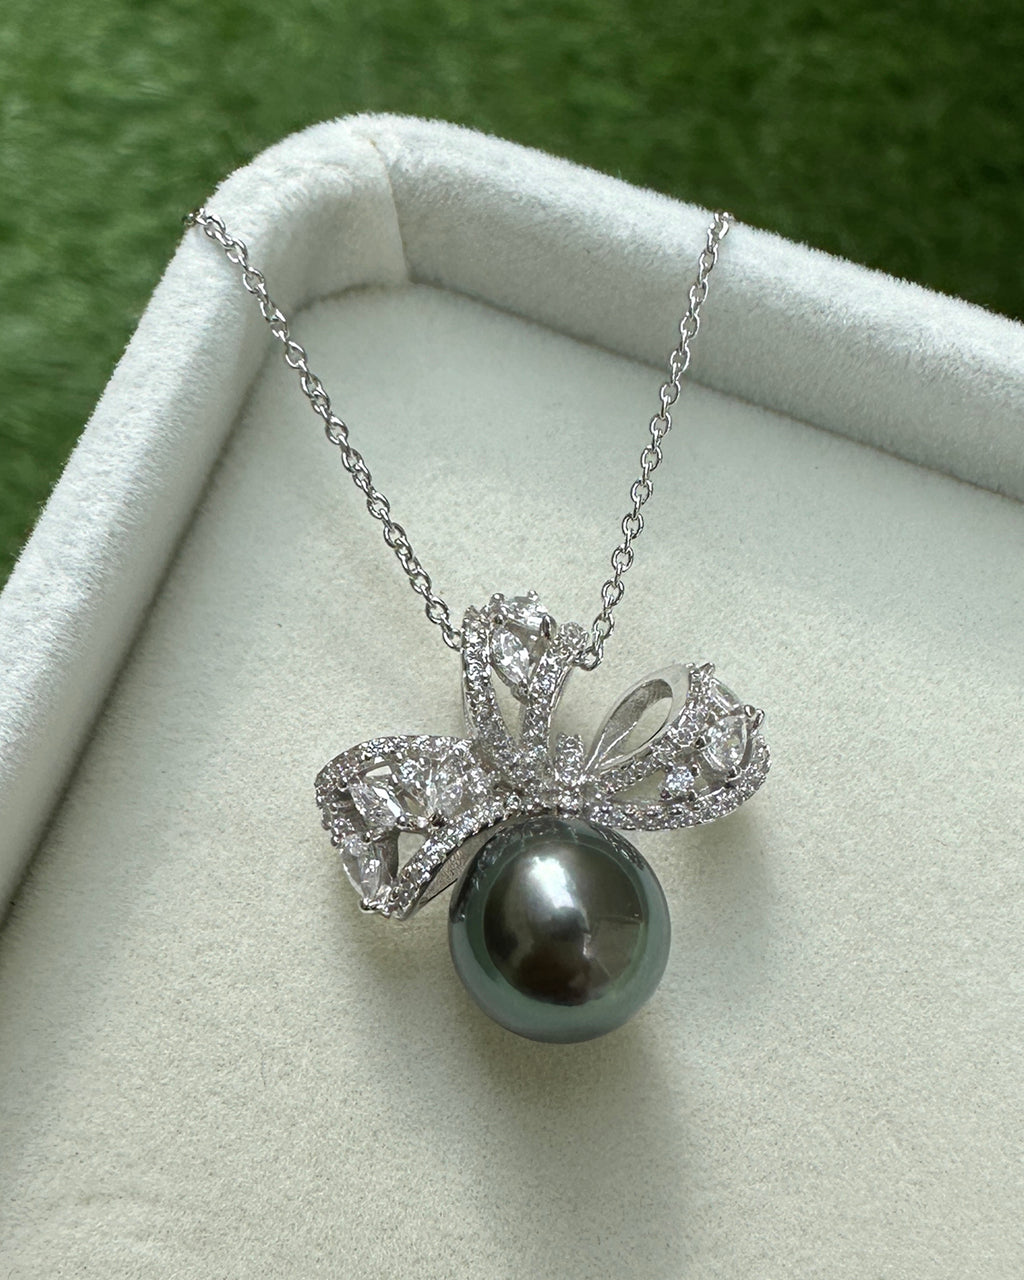 Tahitian Pearl Pendant Necklace - Cute Ribbon Pearl Necklace